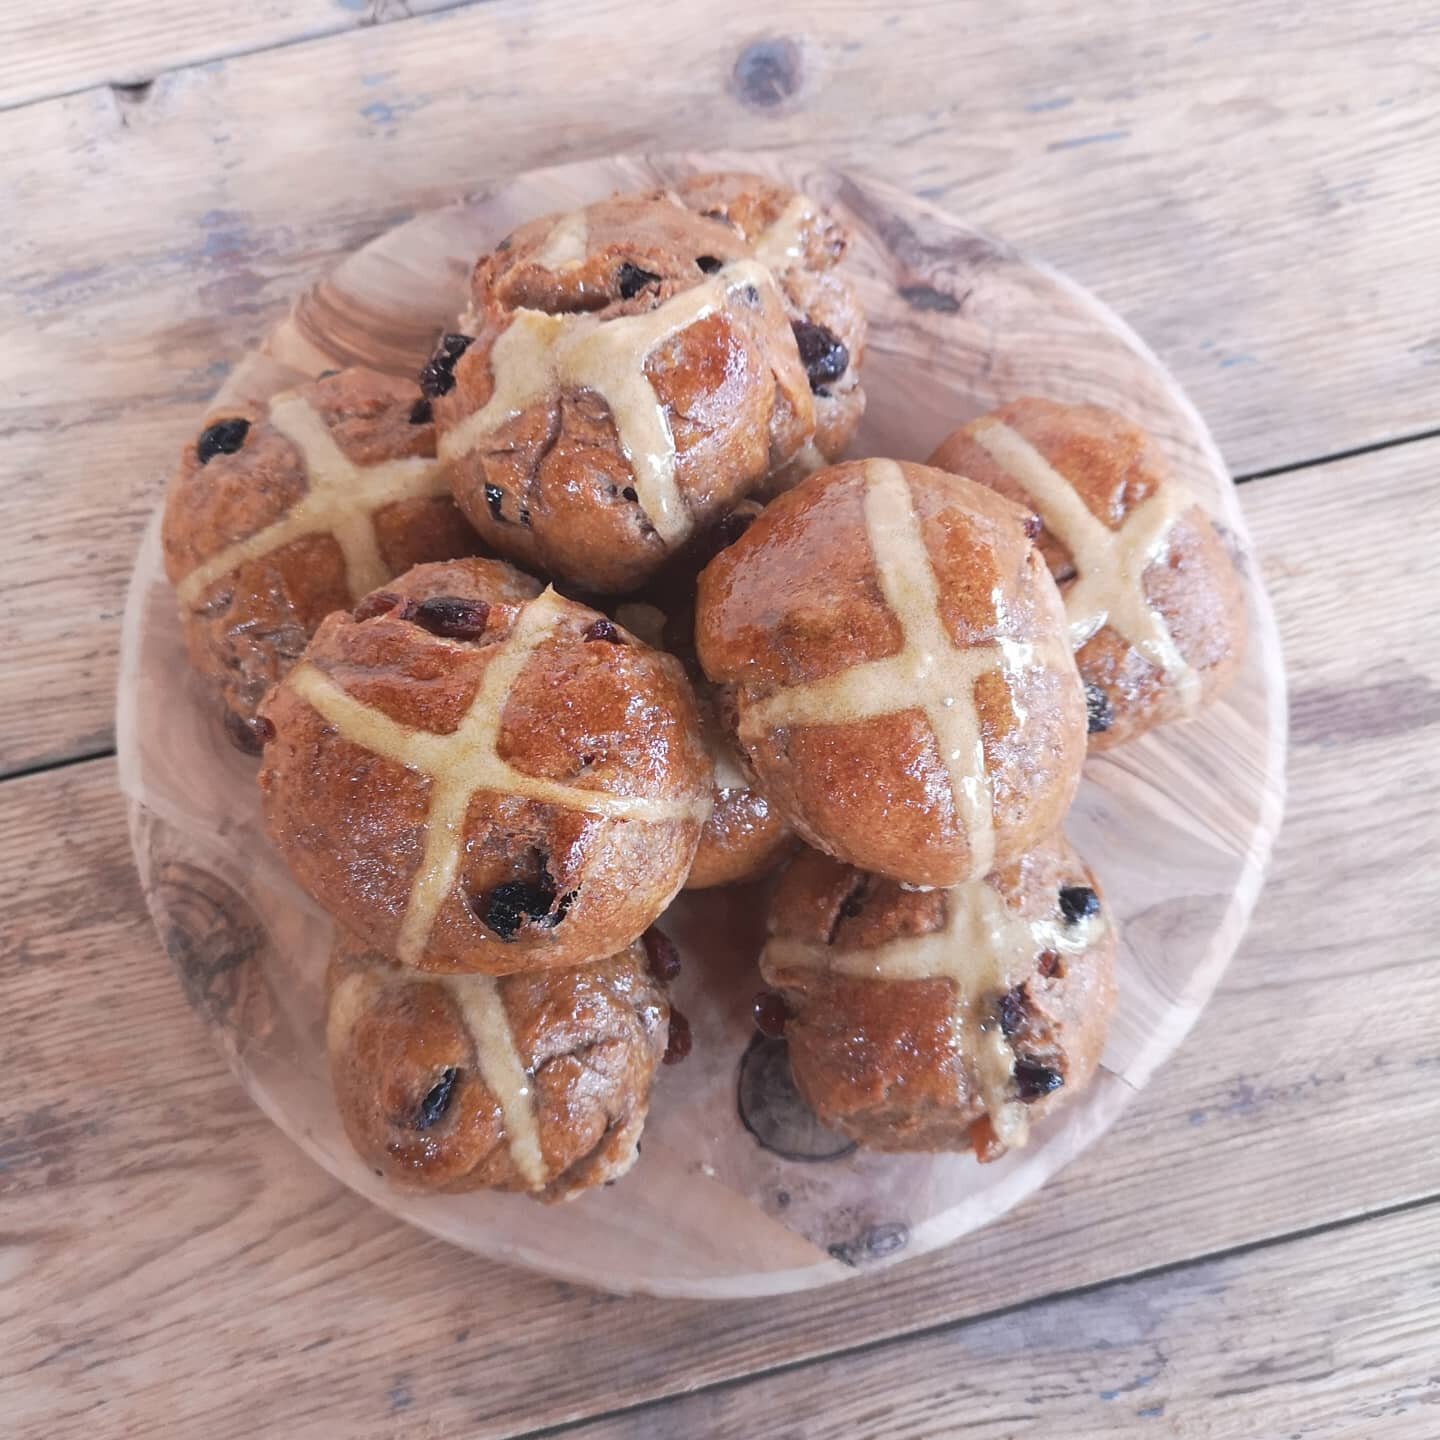 The smells filling the house this morning whilst making these sourdough hot cross buns brought back so many happy childhood Easter memories 🙏 

What's Easter without hot cross buns?! Thankfully, the homemade sourdough version of this Easter classic 